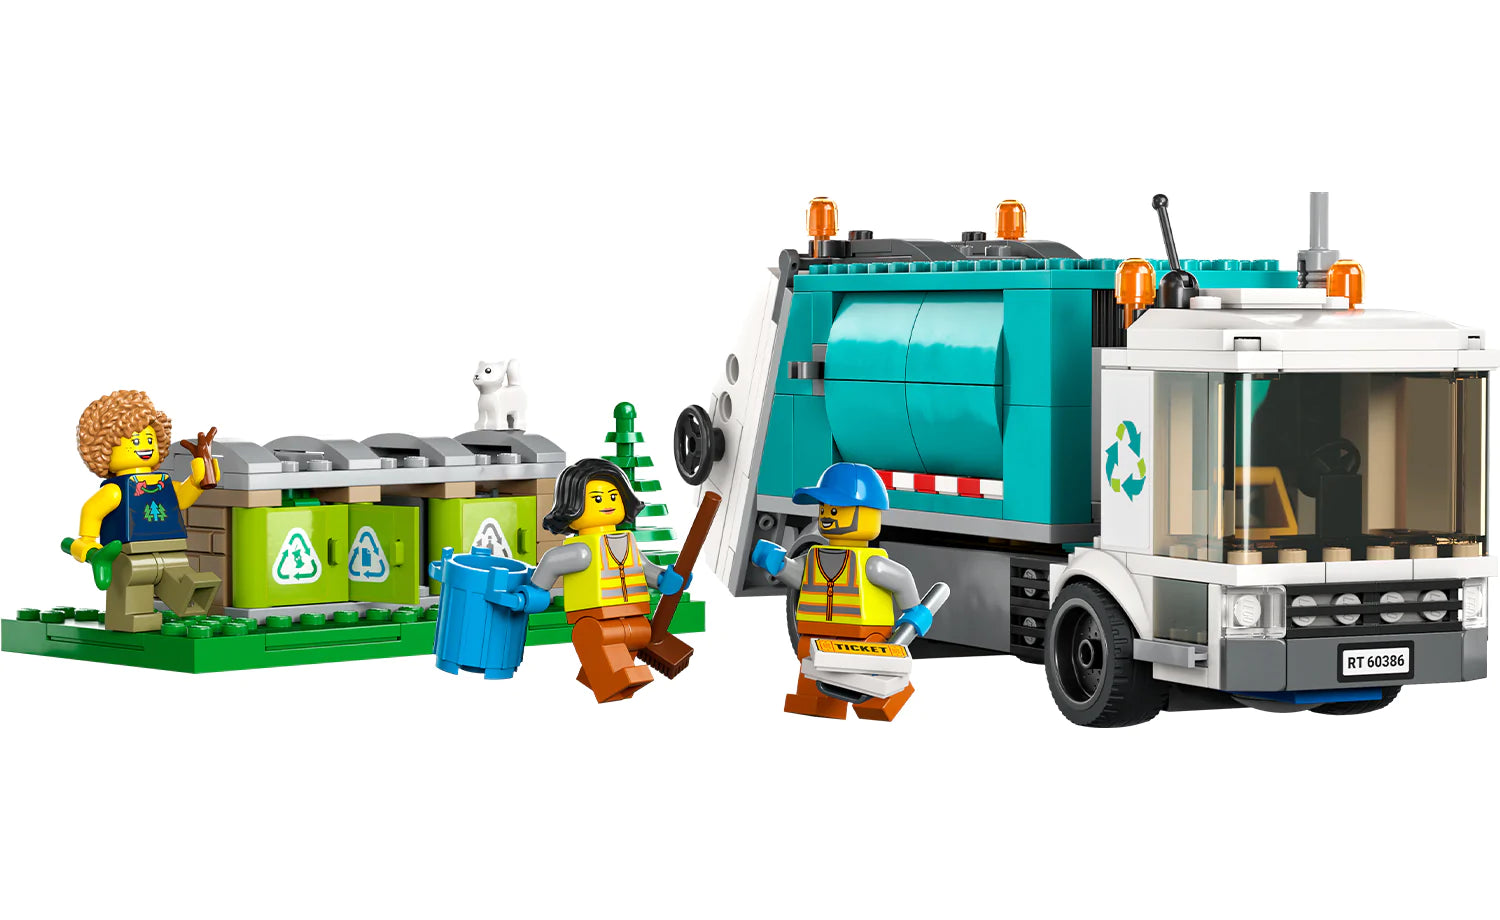 60386 LEGO® City Recycling Truck